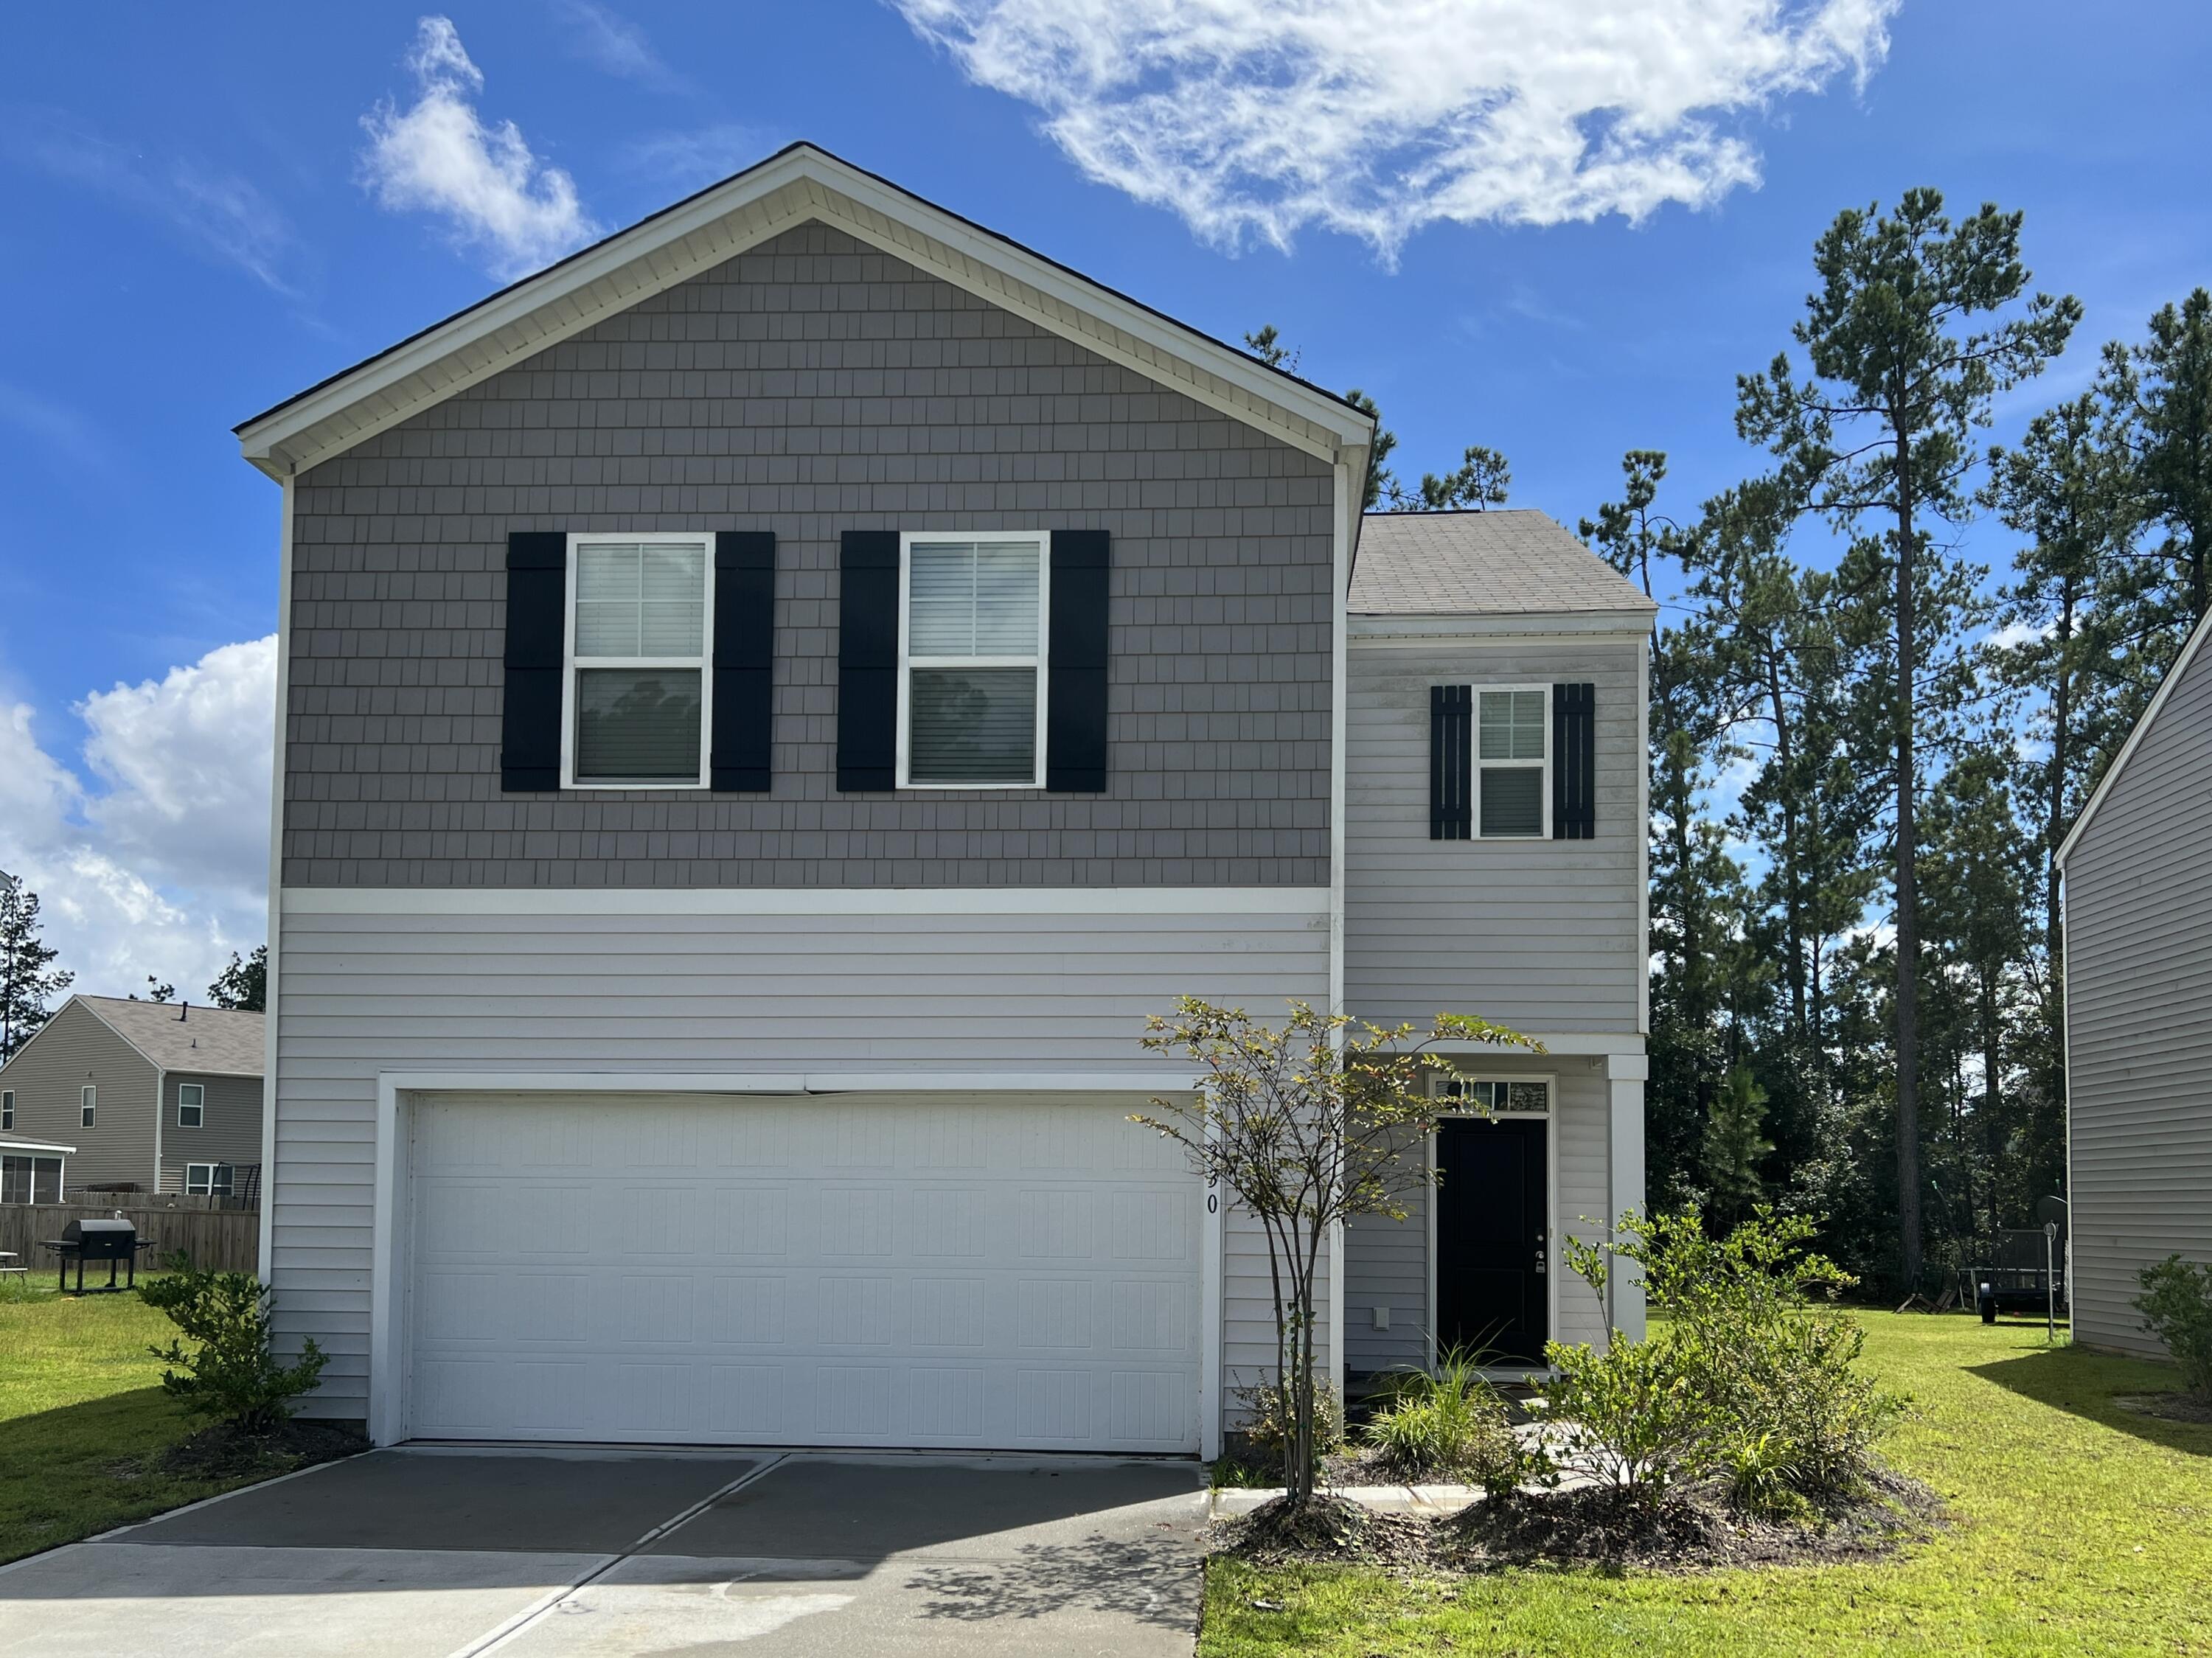 Cane Bay Home for Sale